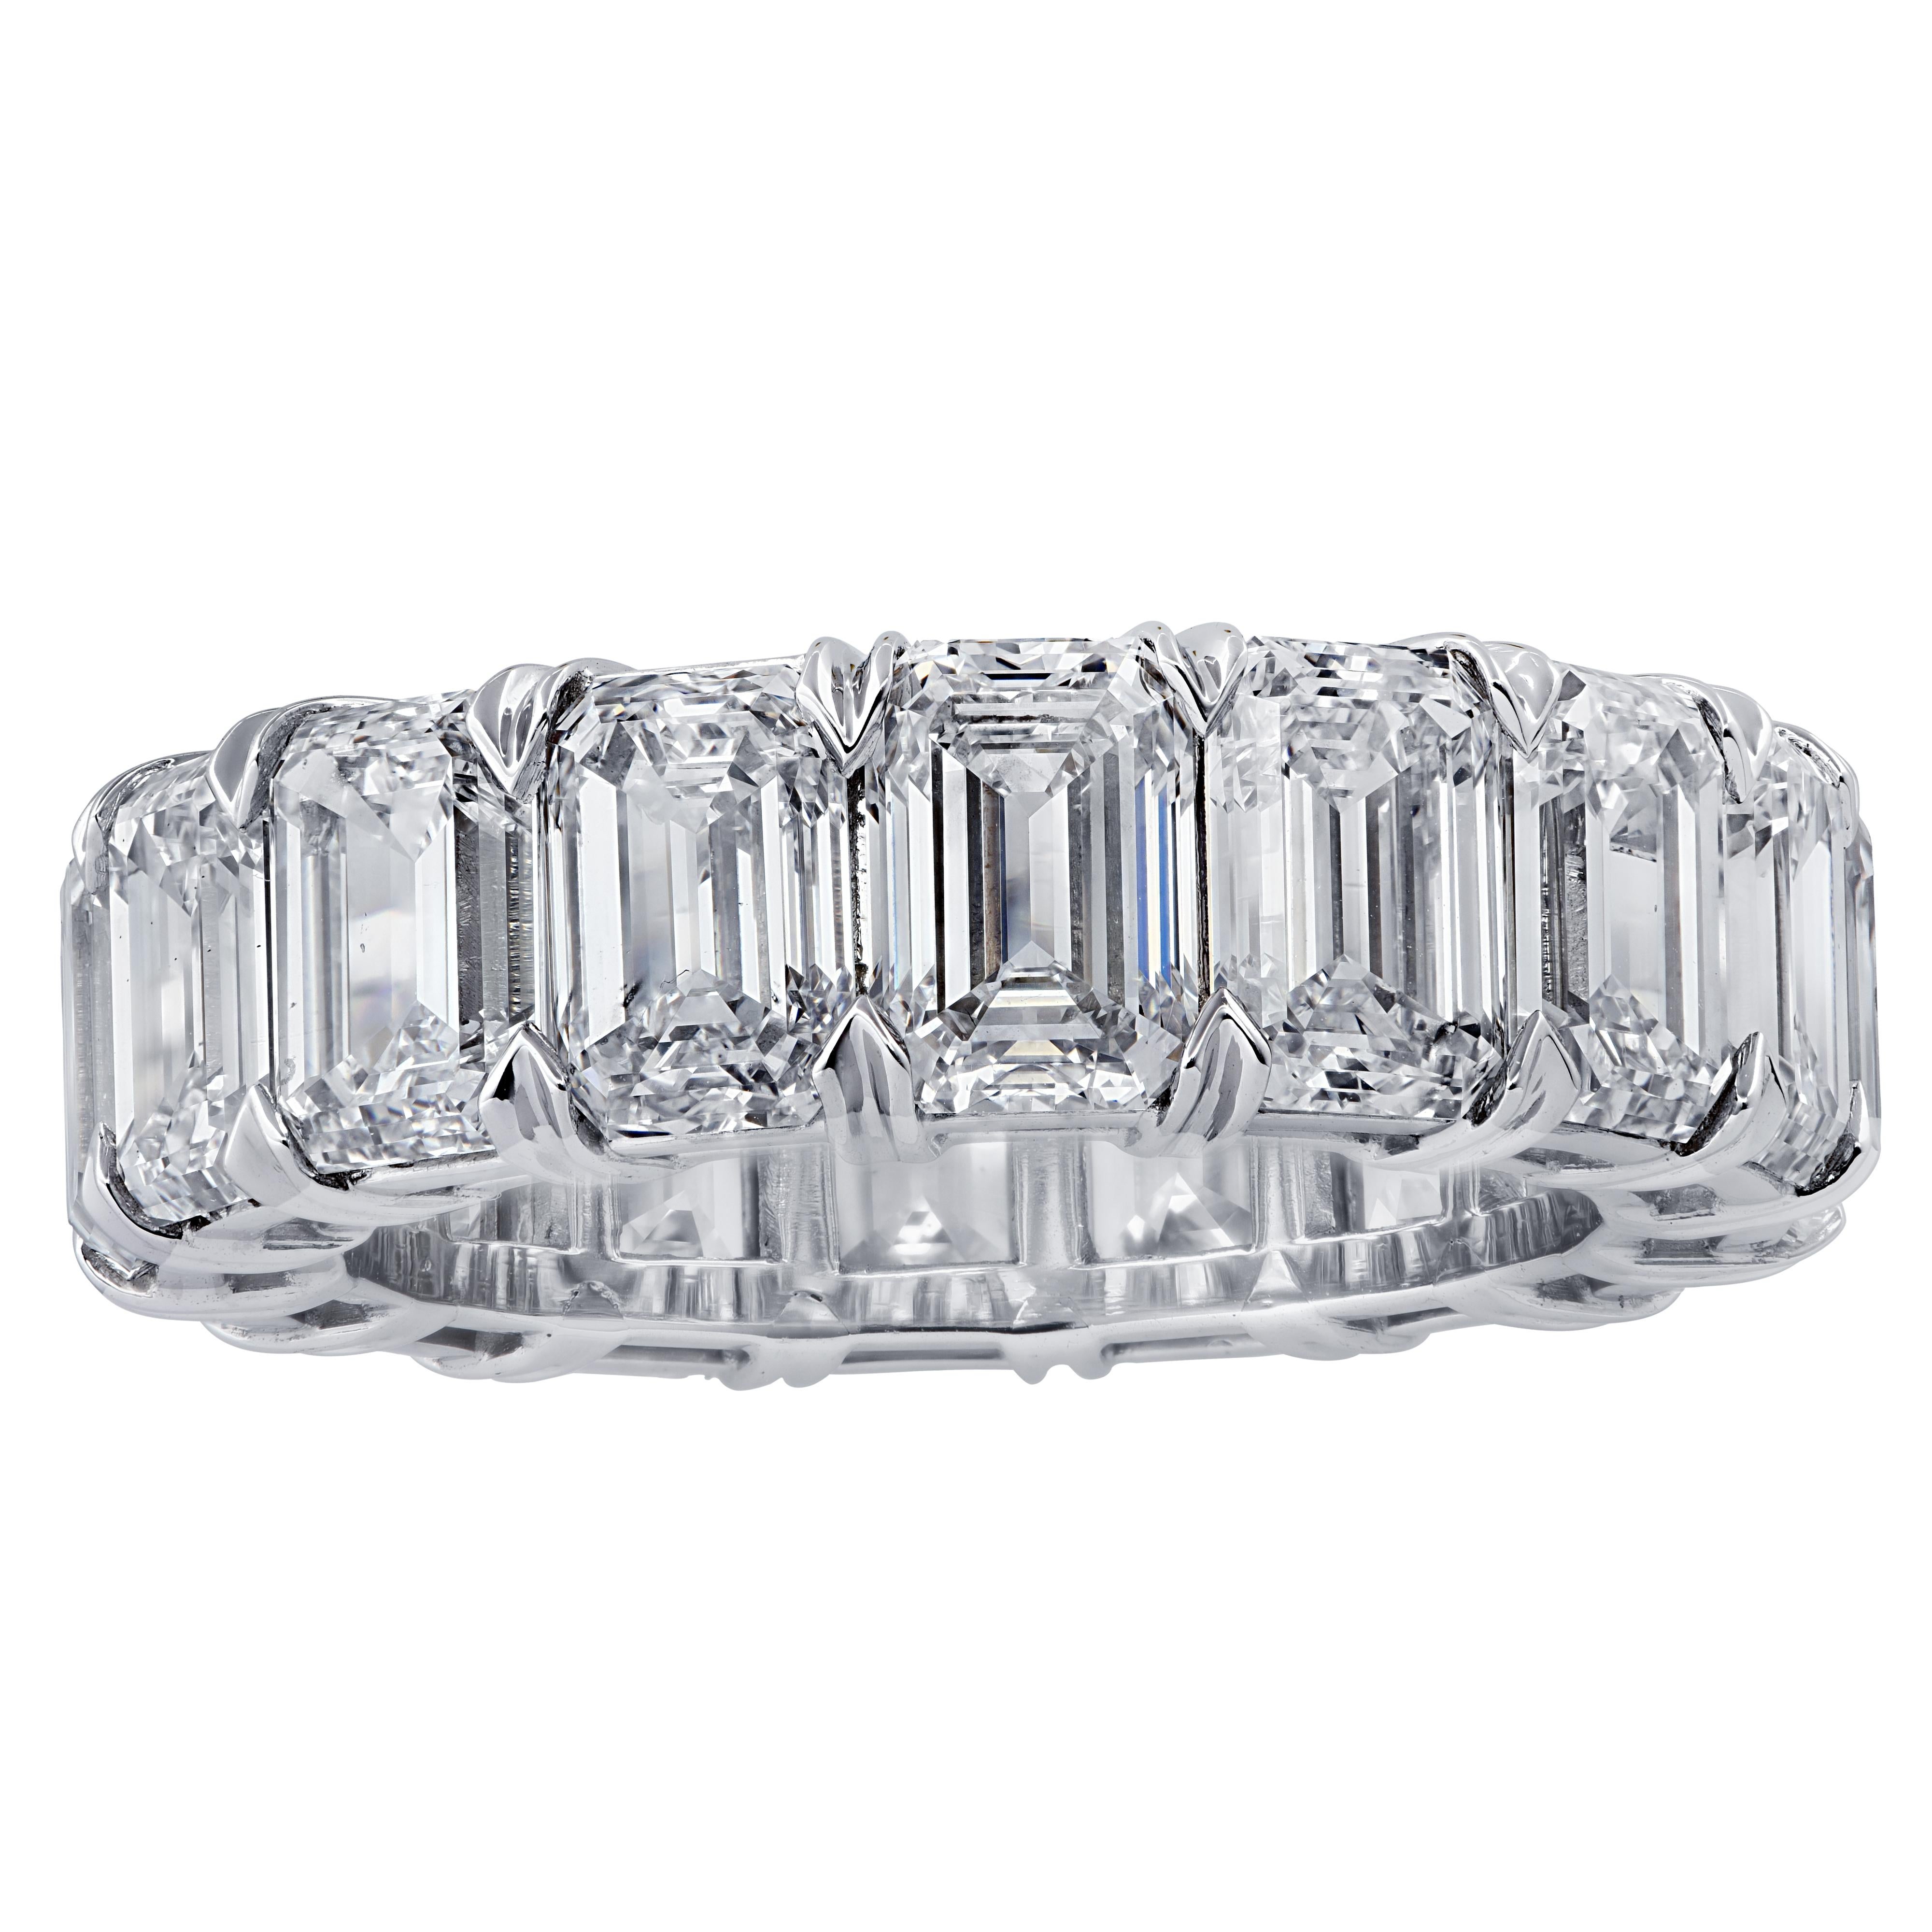 Exquisite eternity band crafted by hand in Platinum, showcasing 16 stunning GIA Certified emerald cut diamonds weighing 11.85 carats total, D-F color, VVS-SI1 clarity. Each diamond is carefully selected, perfectly matched and set in a seamless sea